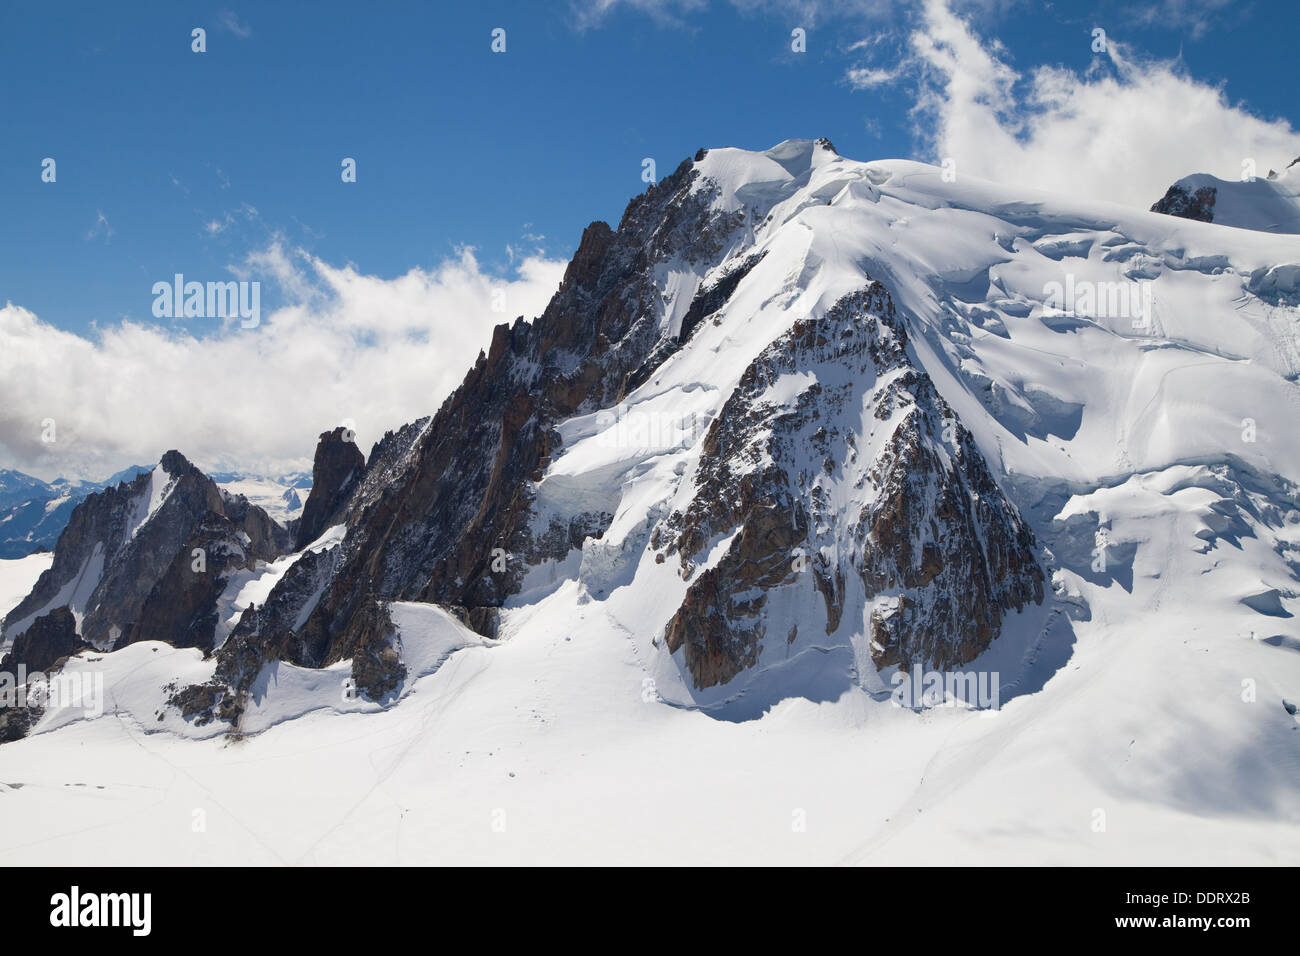 Mont Blanc du Tacul in the Mont Blanc massif of the French Alps. Stock Photo